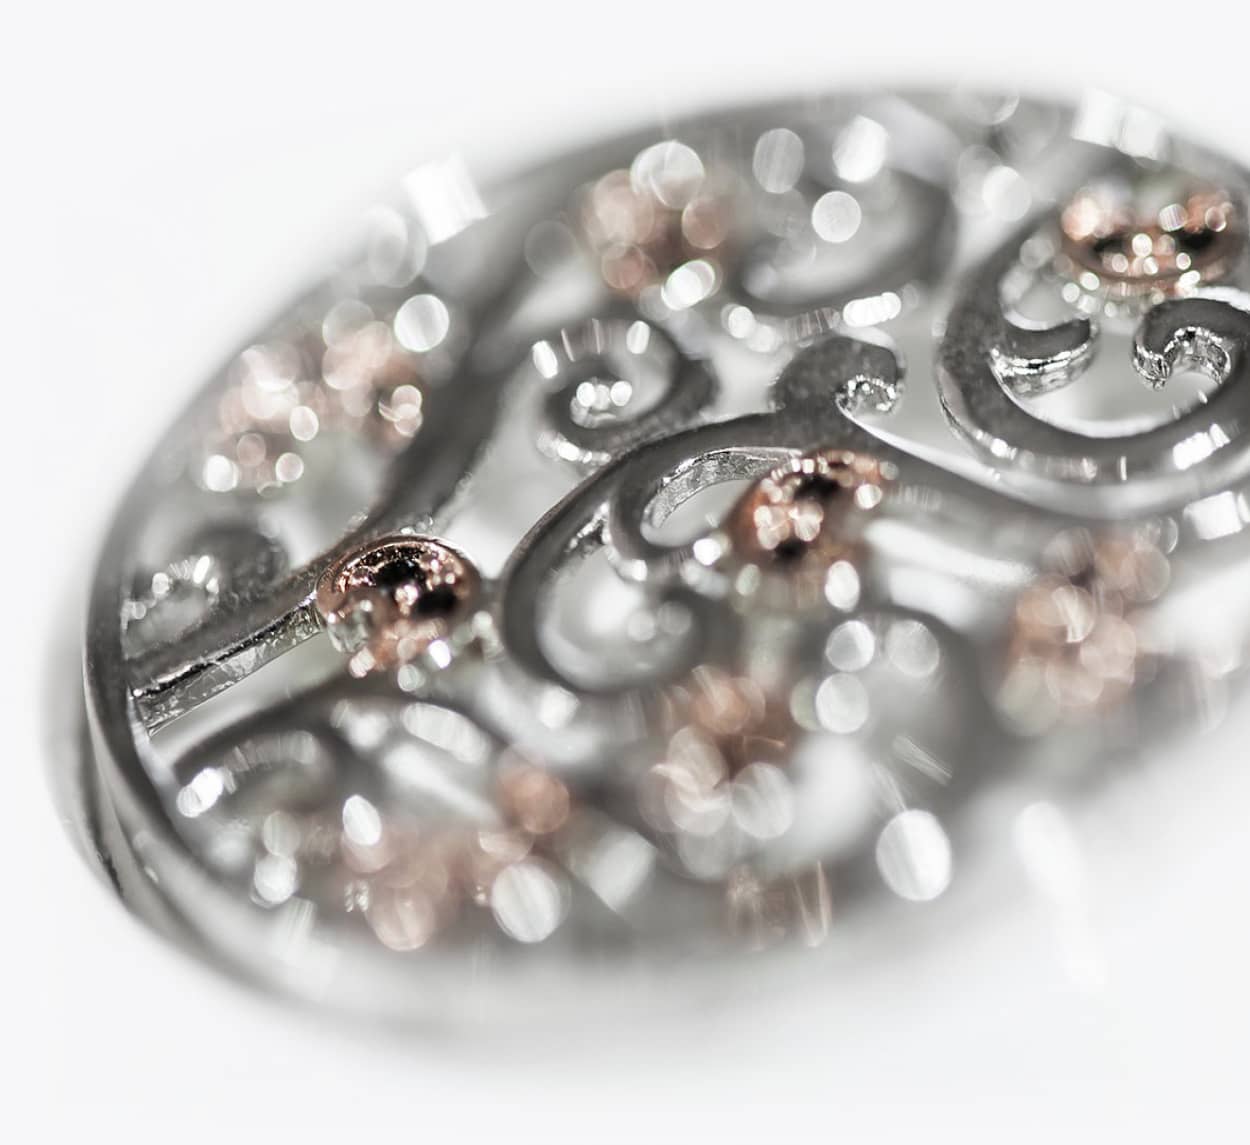 Designer Jewellery from the experts at Silver Tree